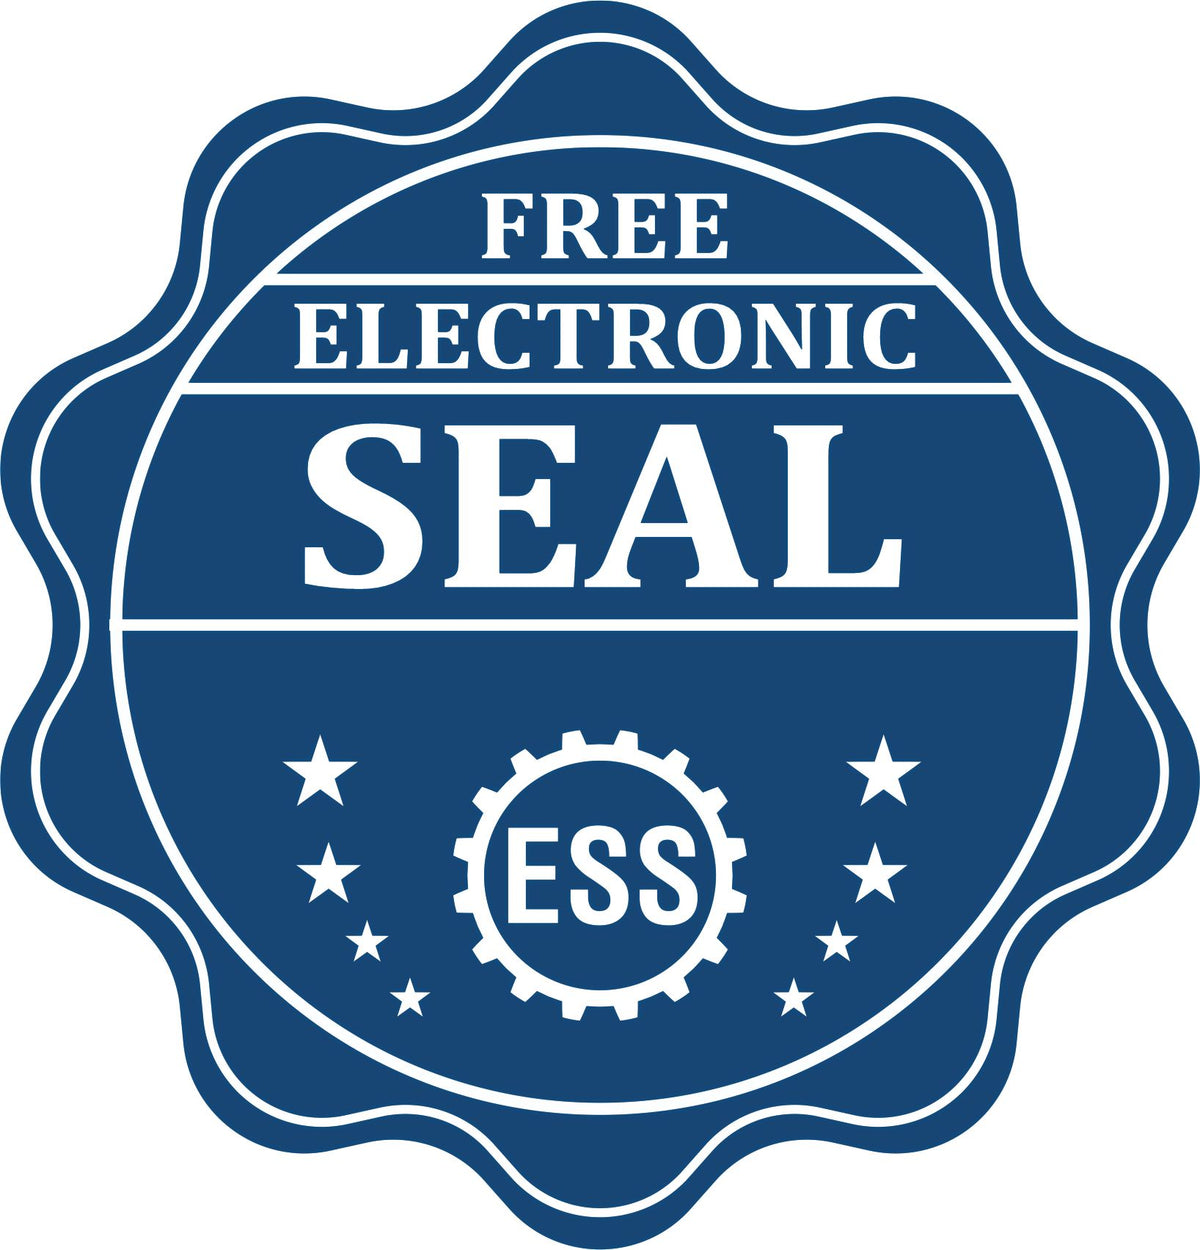 A badge showing a free electronic seal for the Heavy Duty Cast Iron Vermont Engineer Seal Embosser with stars and the ESS gear on the emblem.